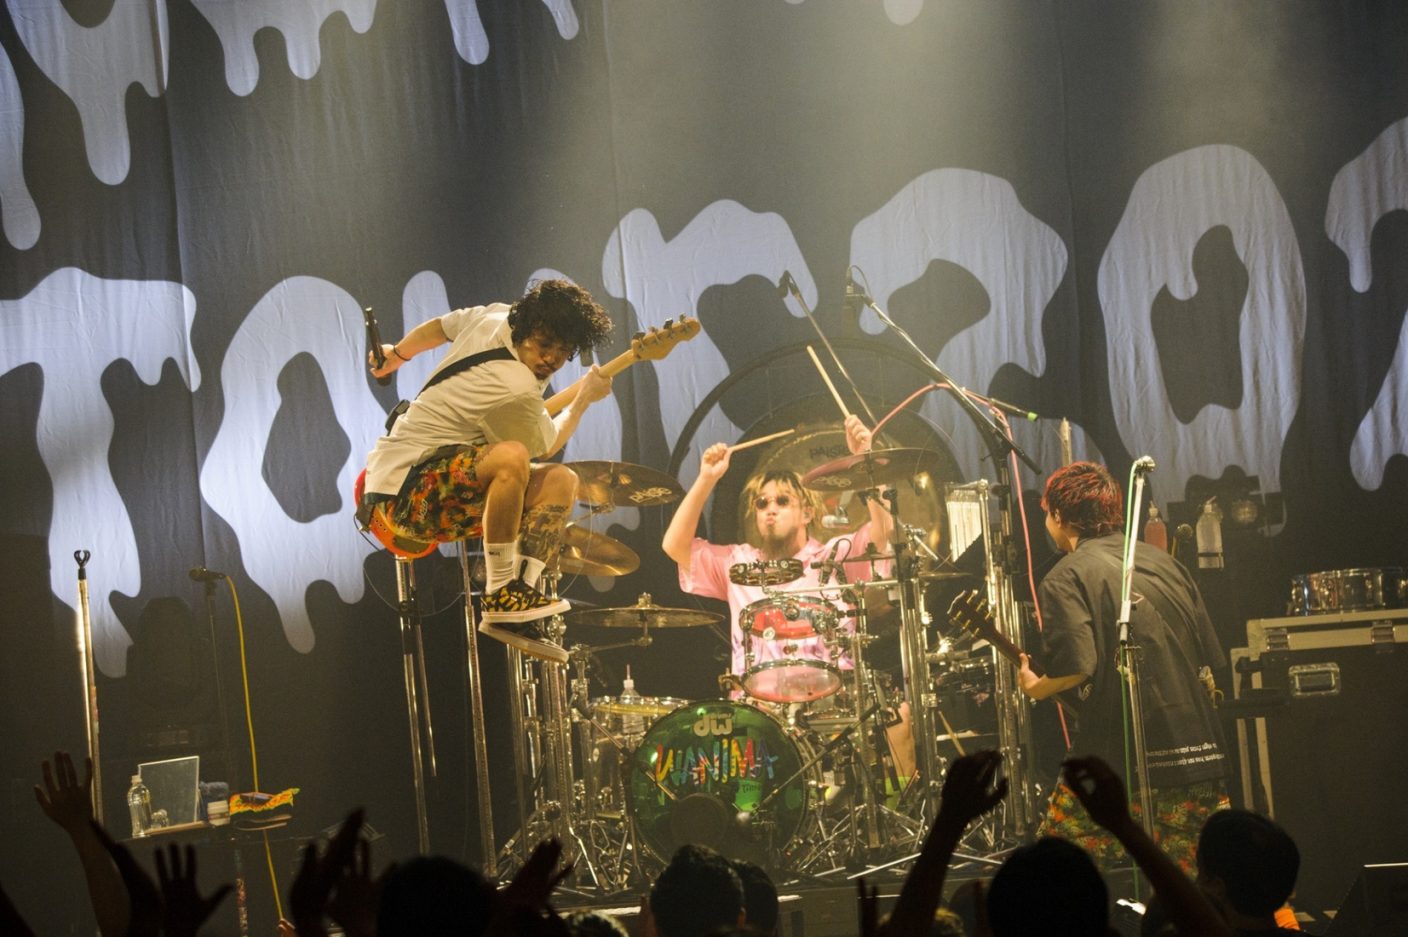 Wanima Cheddar Flavor Tour 21 新木場2デイズ完遂 横浜アリーナ公演も発表 The First Times